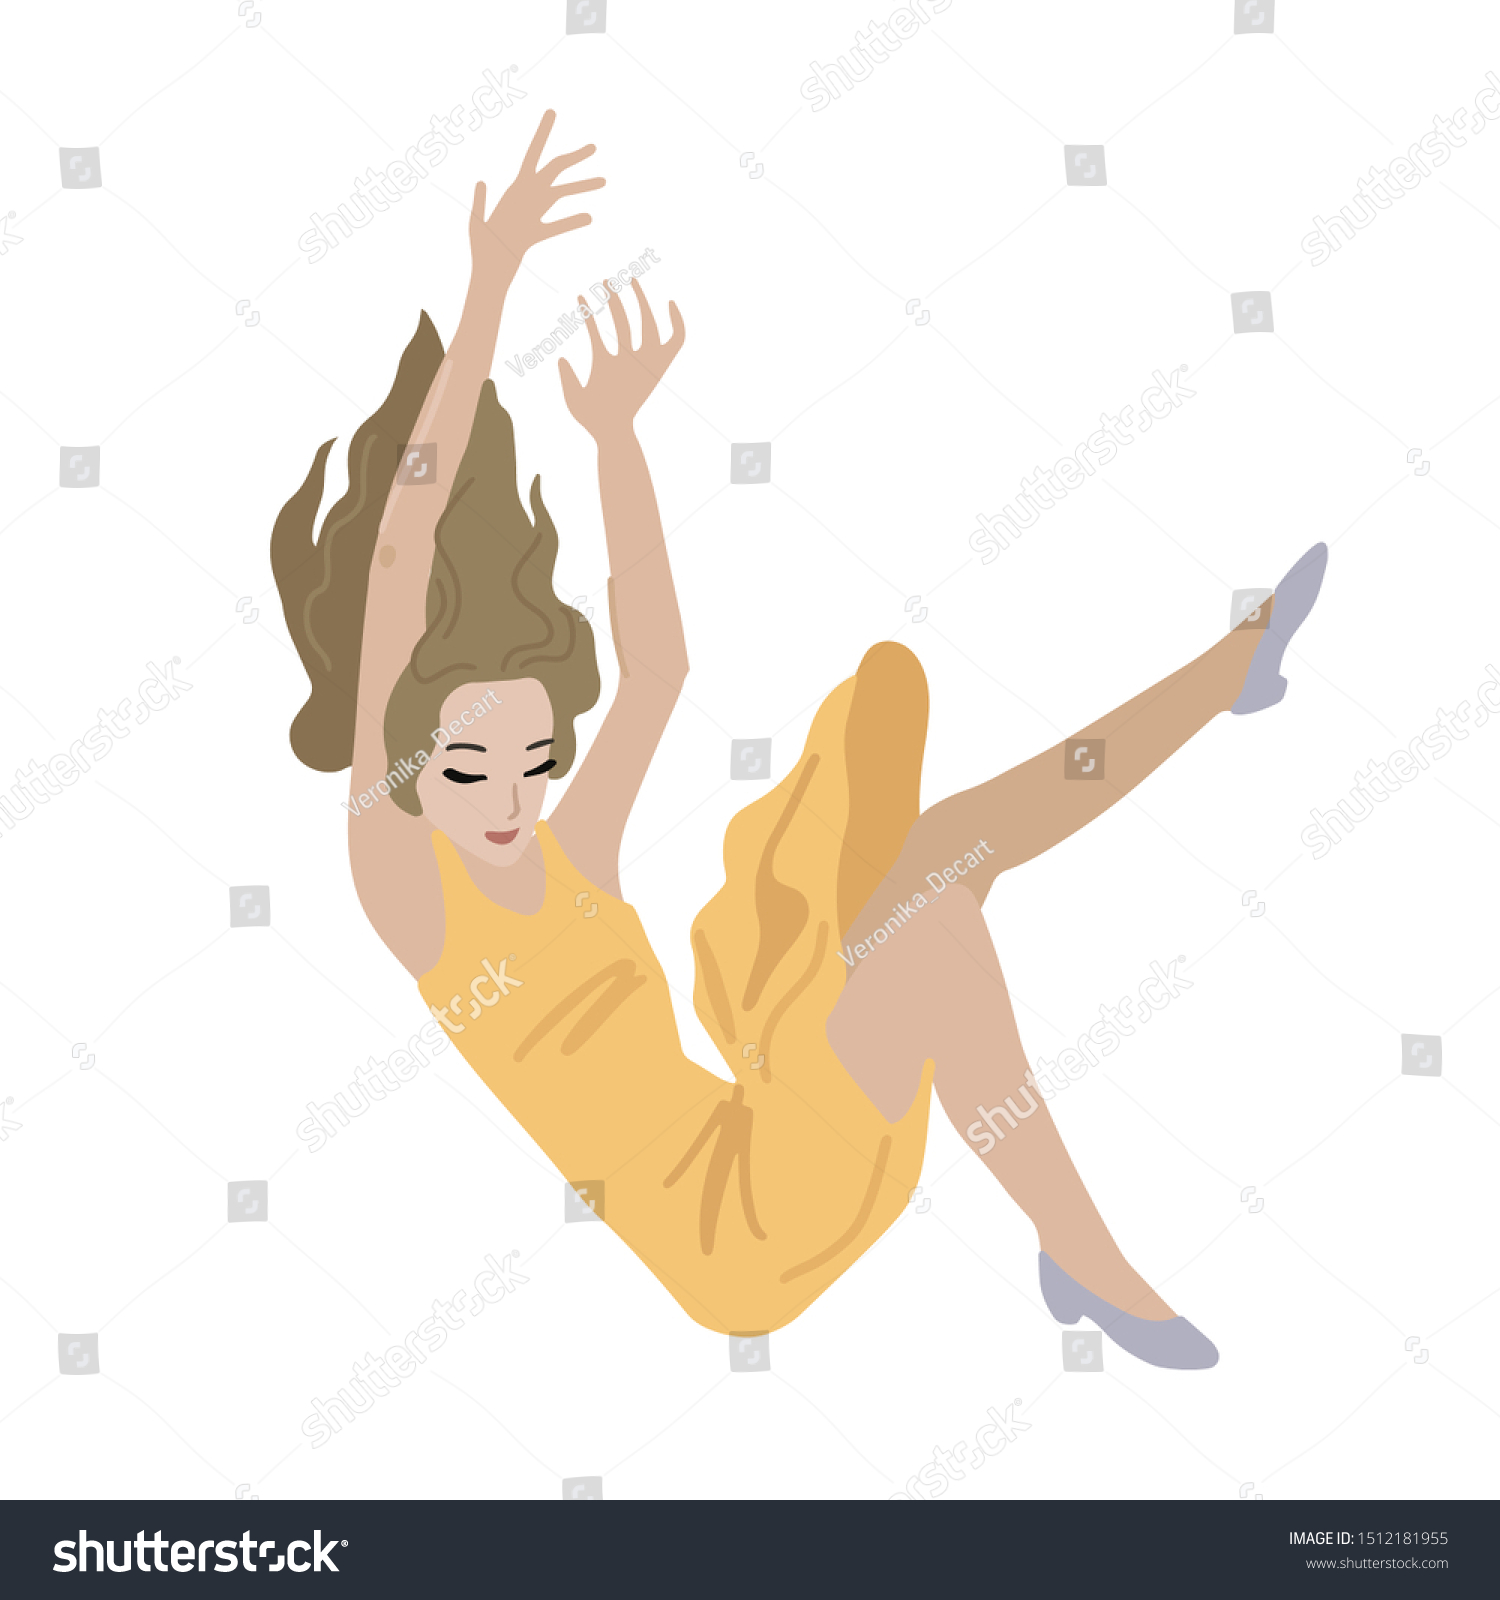 https://image.shutterstock.com/z/stock-vector-young-girl-is-falling-down-woman-in-dress-the-concept-of-failure-or-oppression-depressed-state-1512181955.jpg